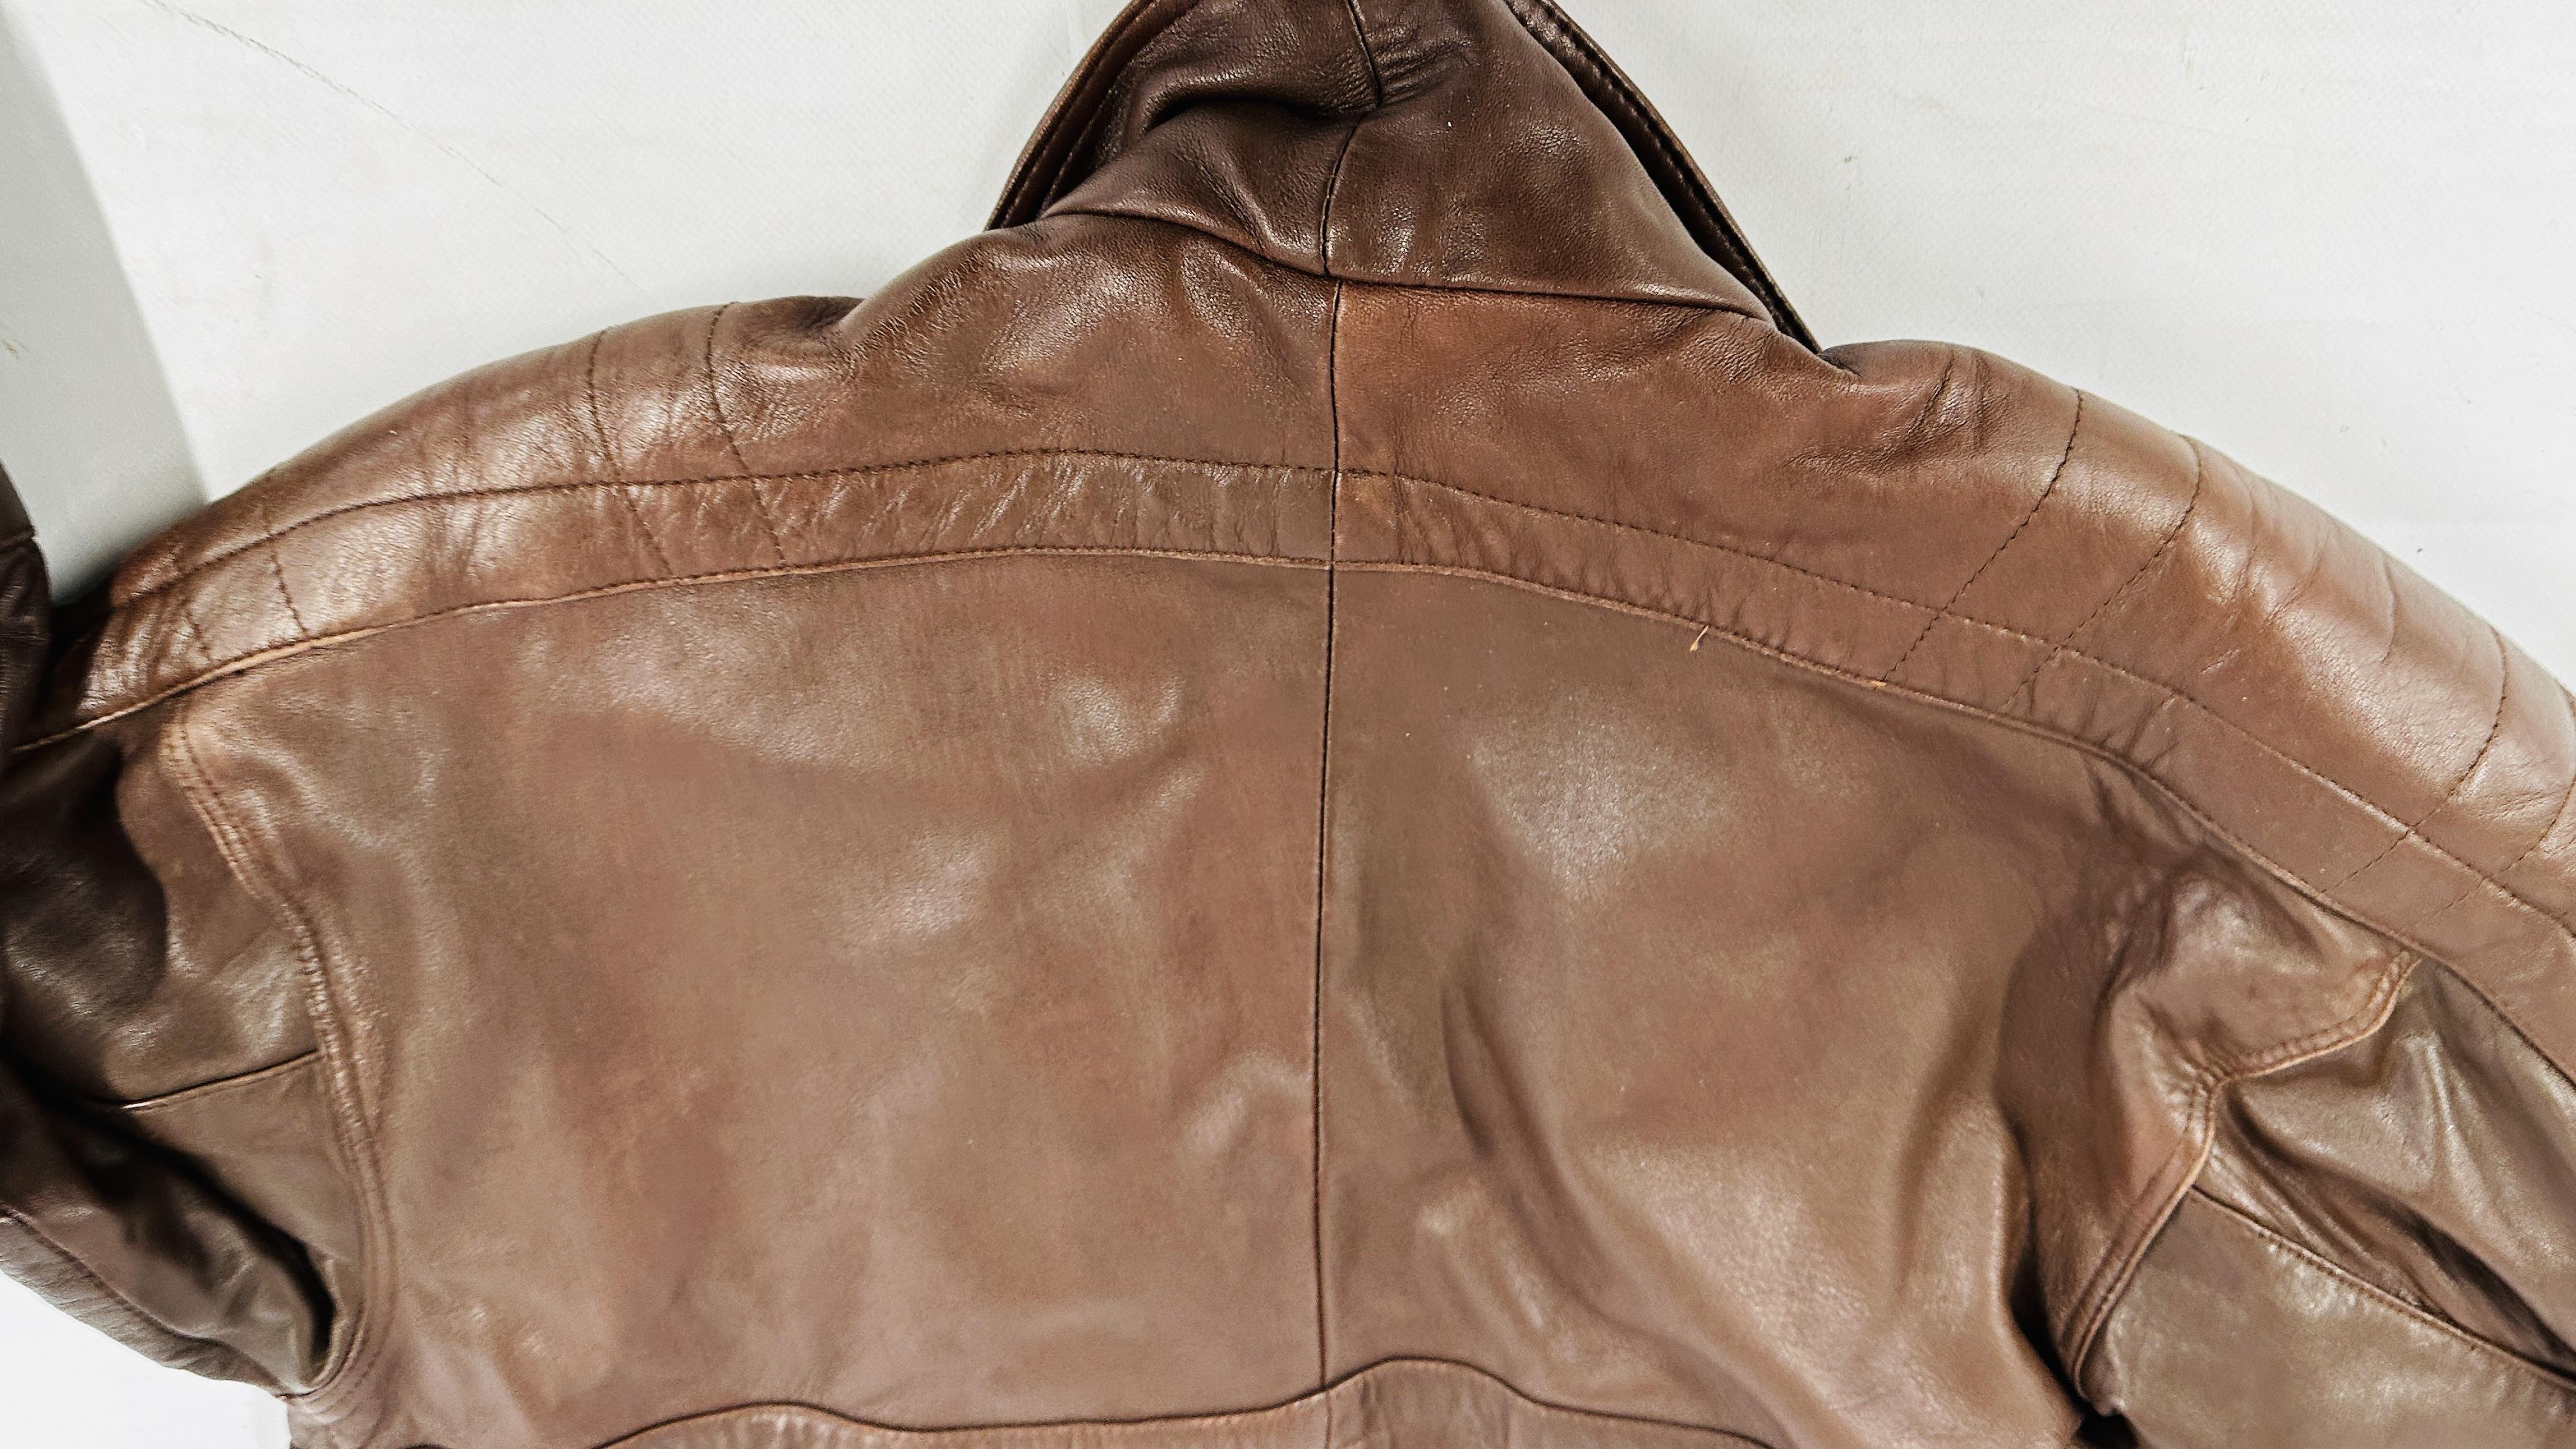 A GENTS BROWN LEATHER JACKET MARKED "SARDAR" SIZE L. - Image 8 of 9